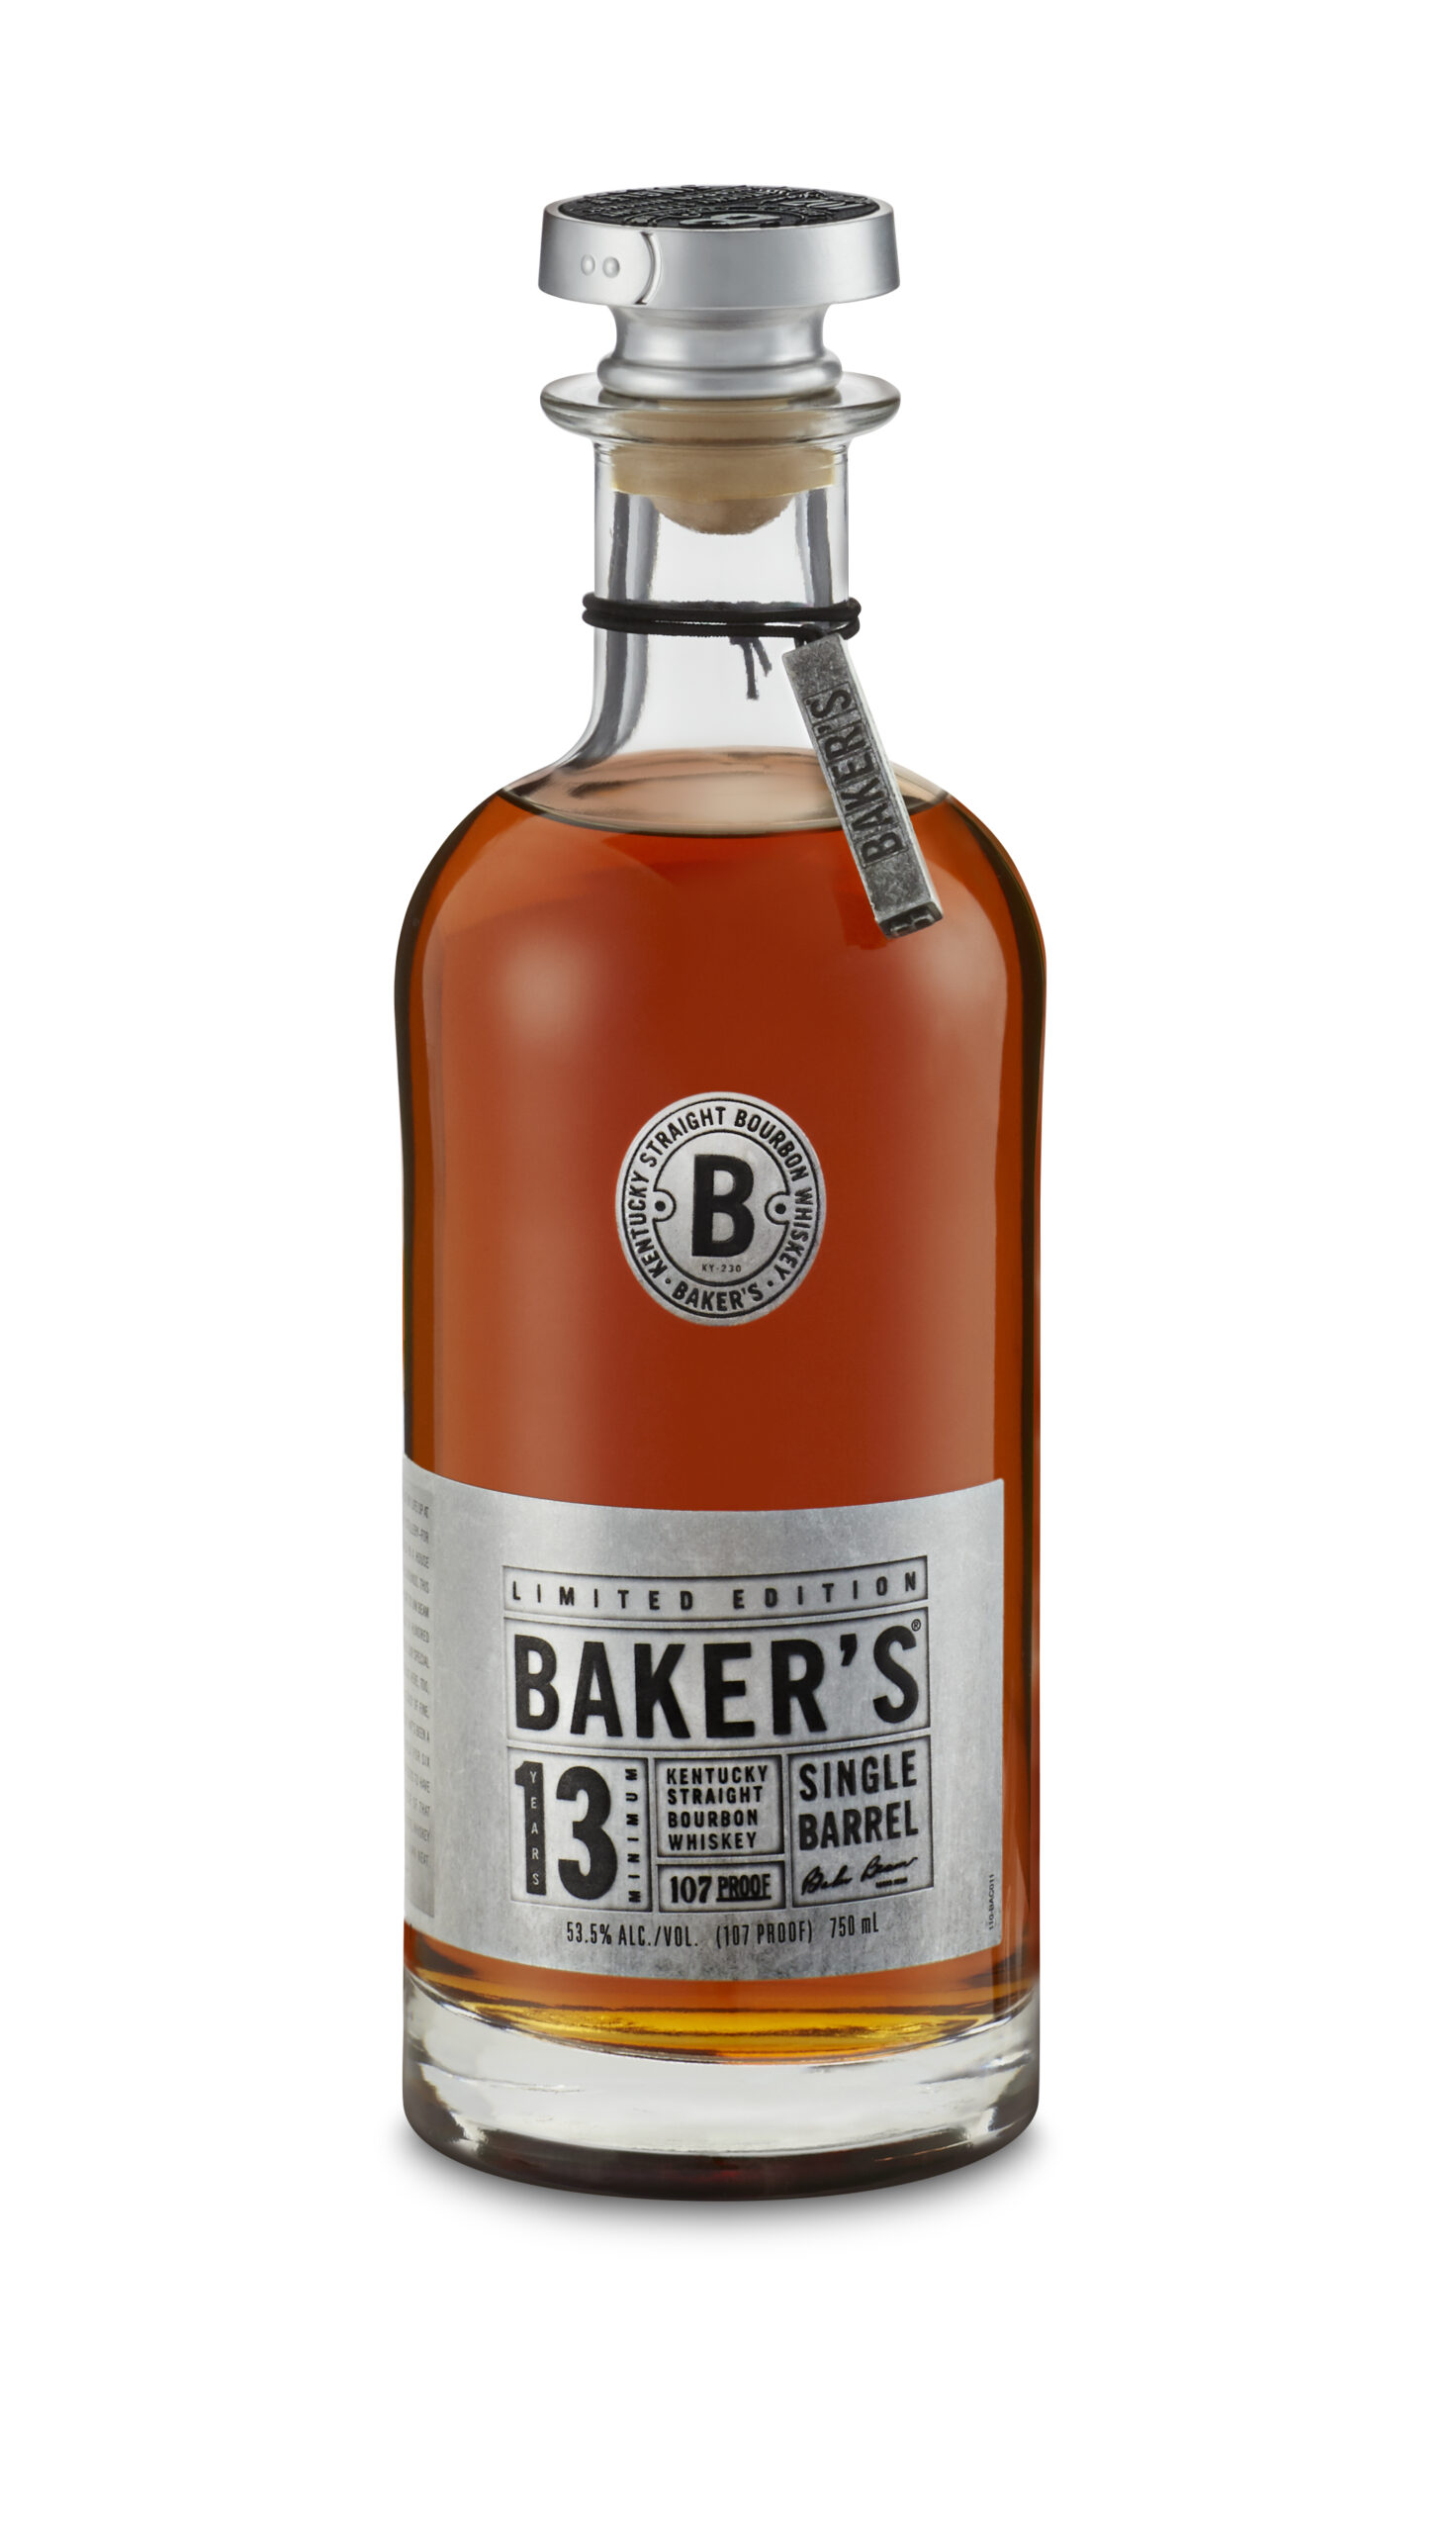 Does Baker’s 13 Year Old Bourbon Live Up To The Hype?